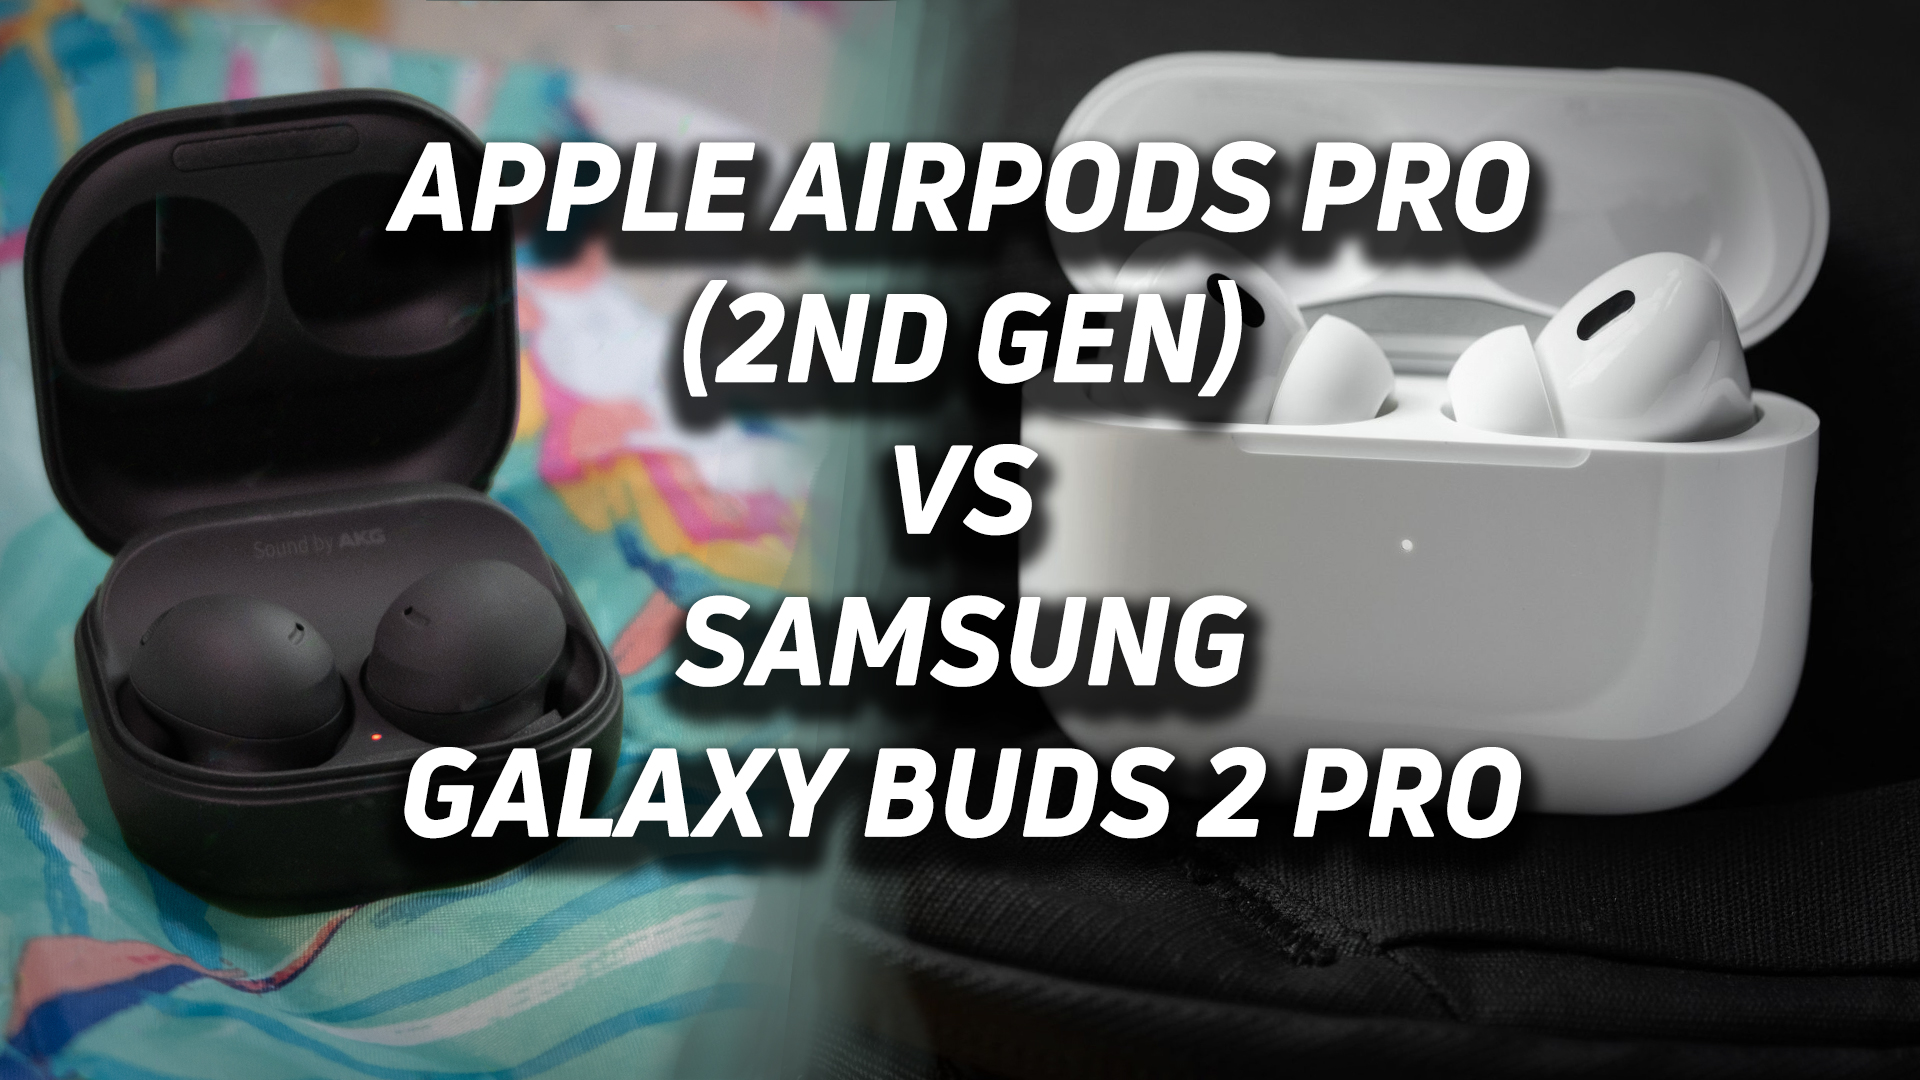 Samsung's Galaxy Buds are cheaper than AirPods, have wireless